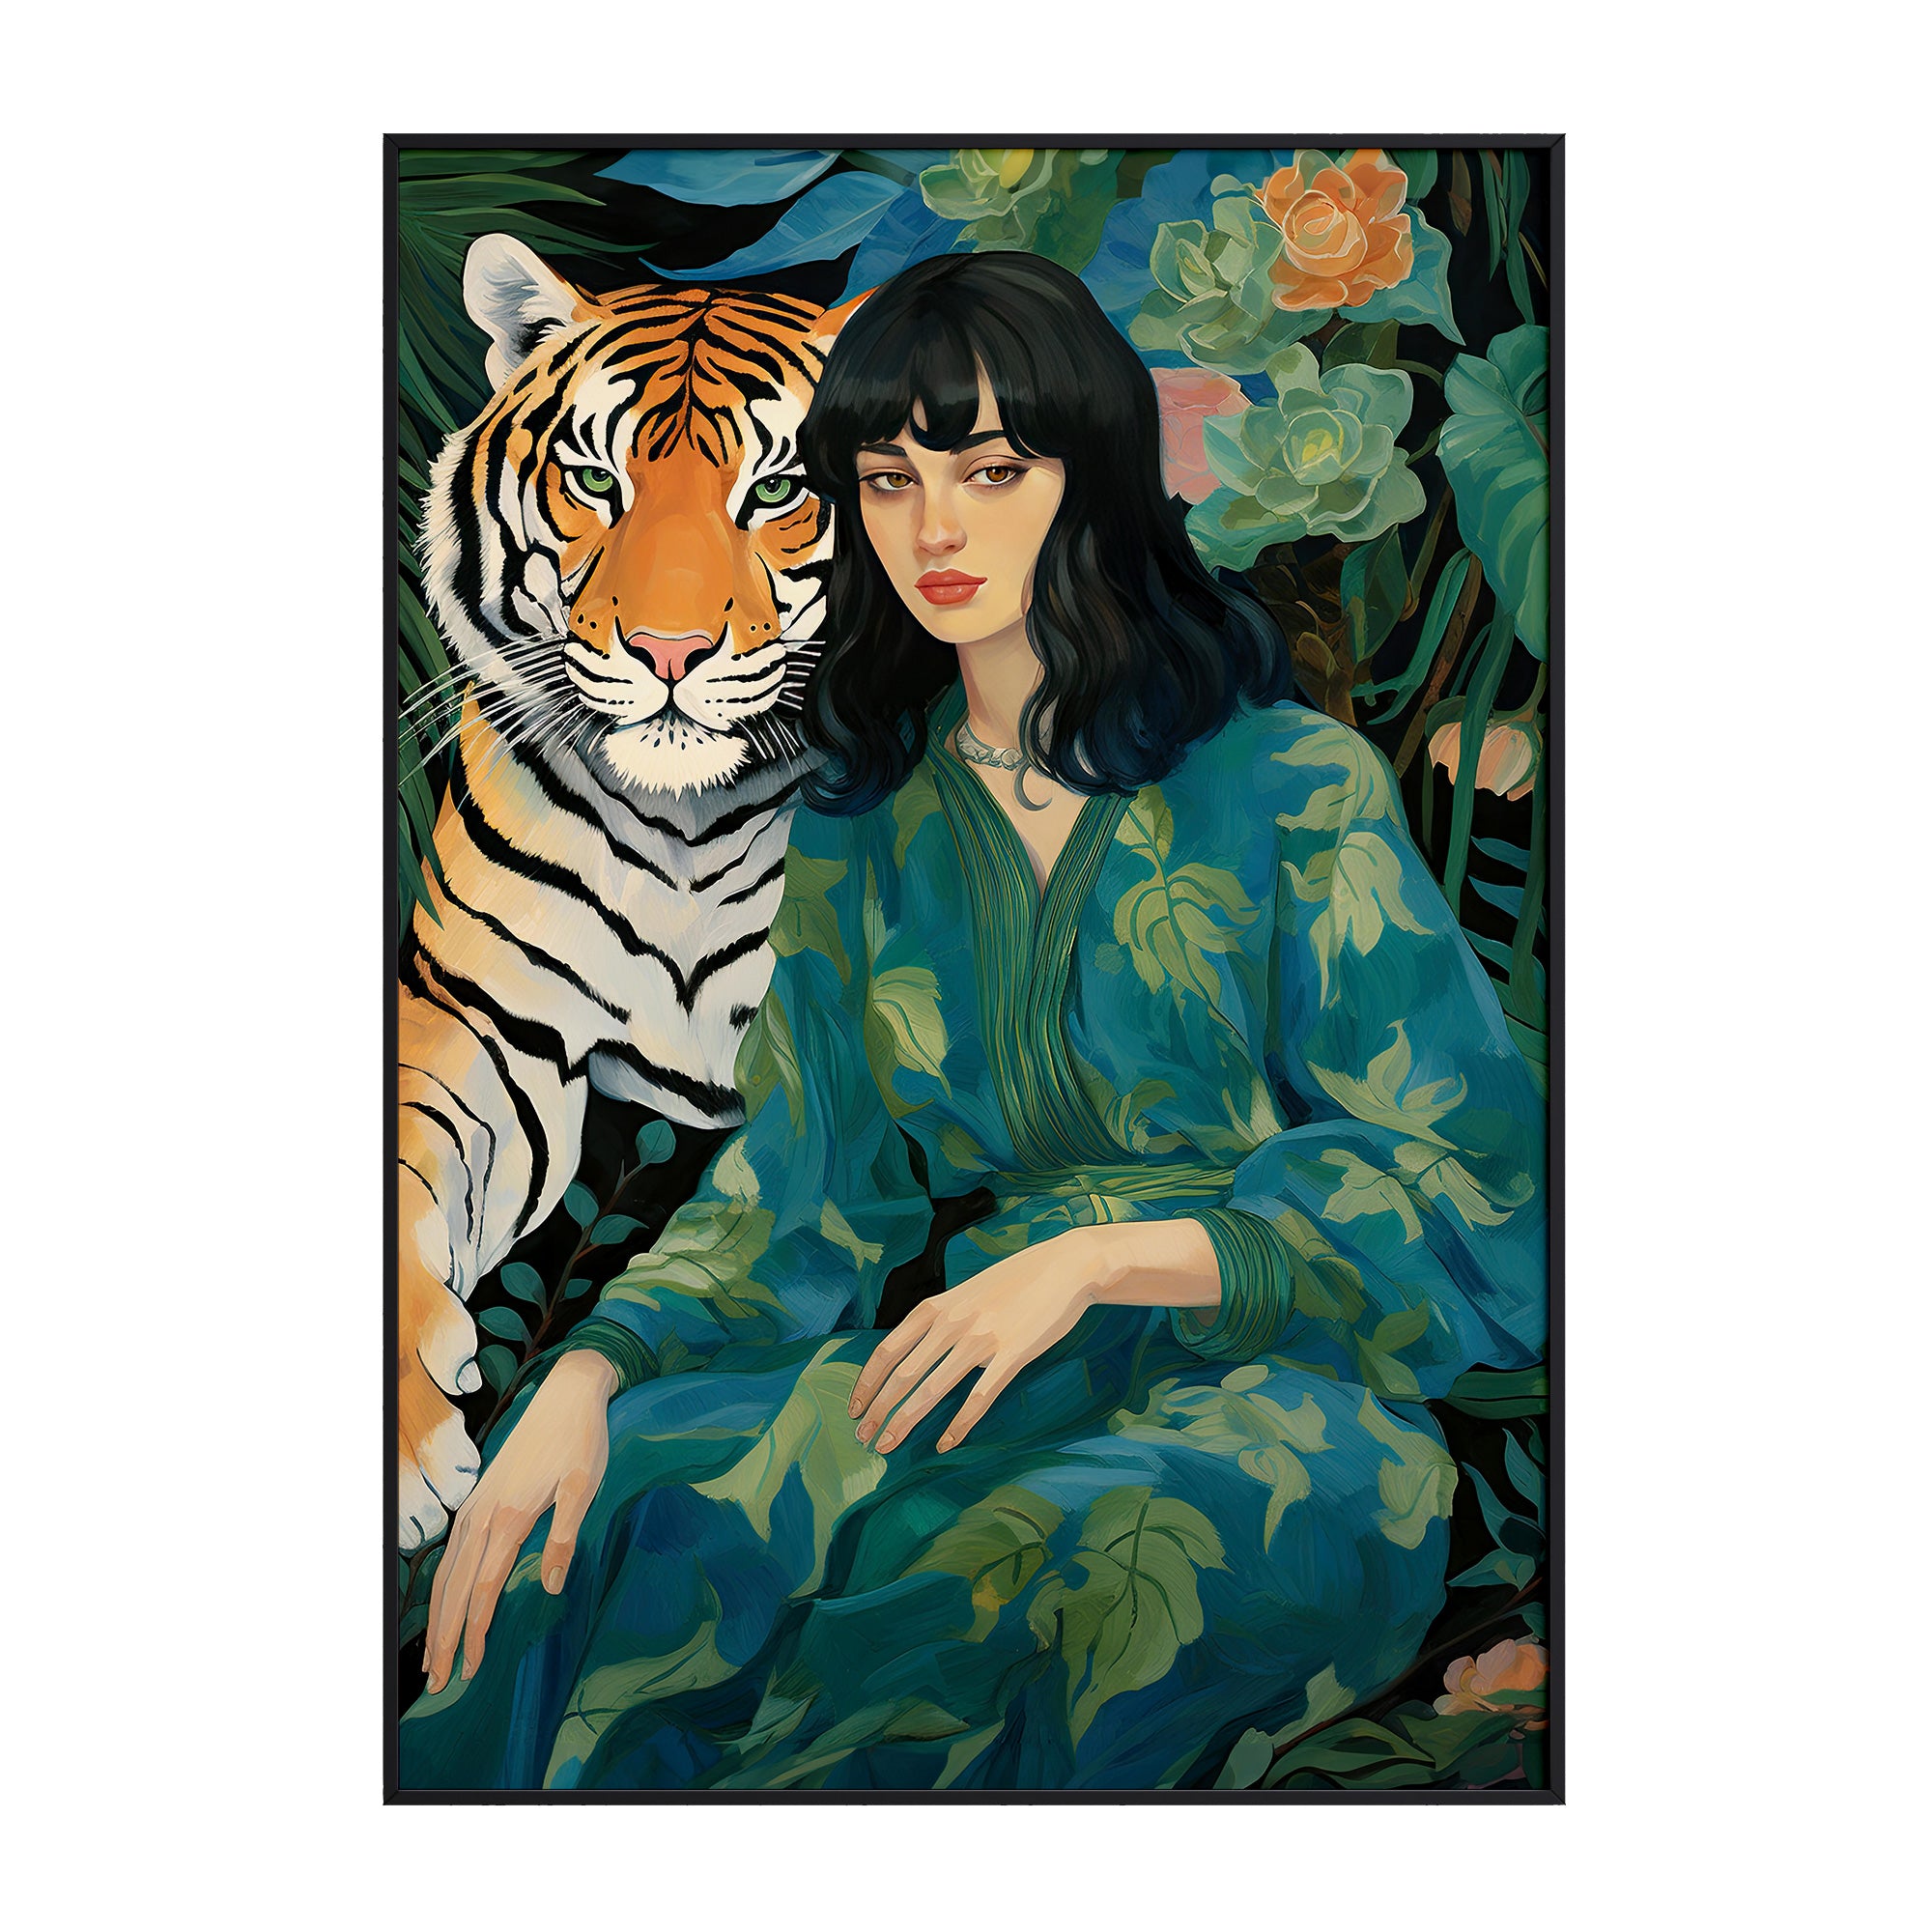 Eclectic Woman with Her Tiger